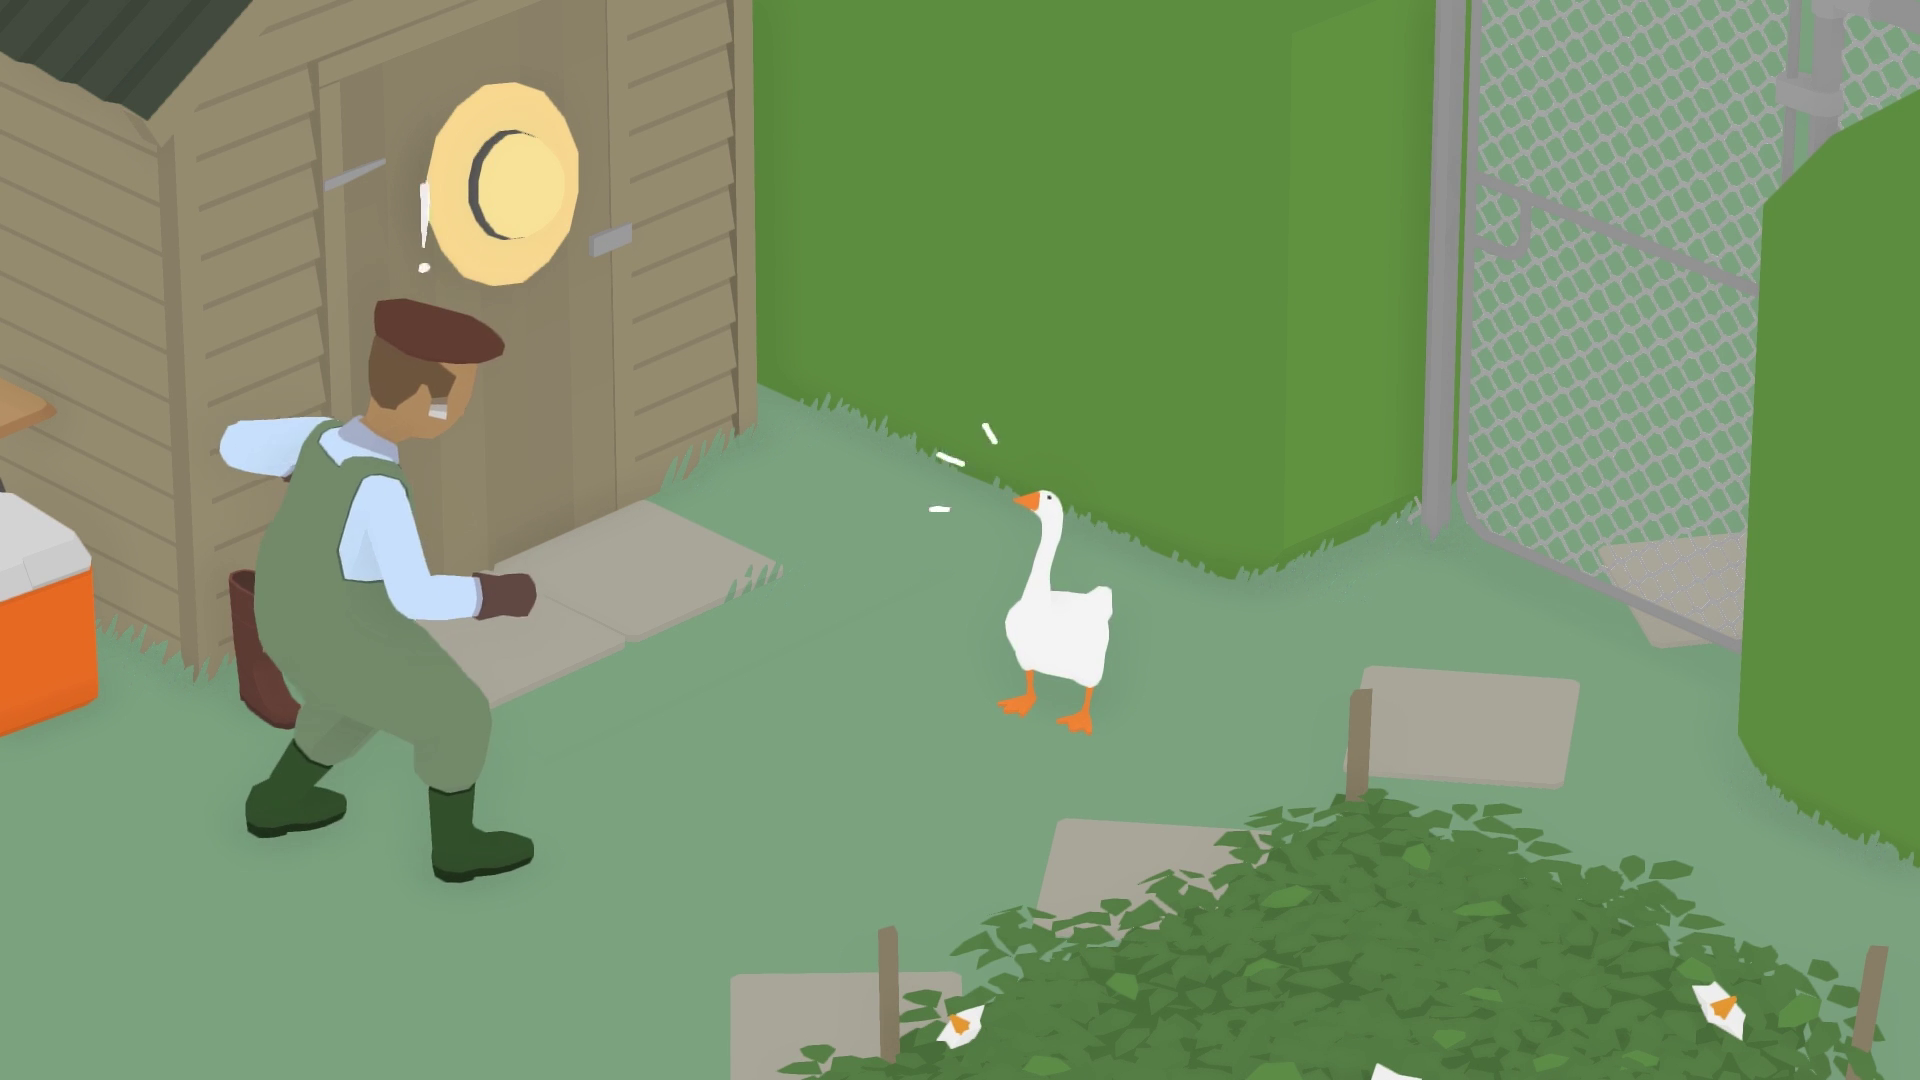 Untitled Goose Game PS4 Release Could Be Close as Trophy List Appears  Online